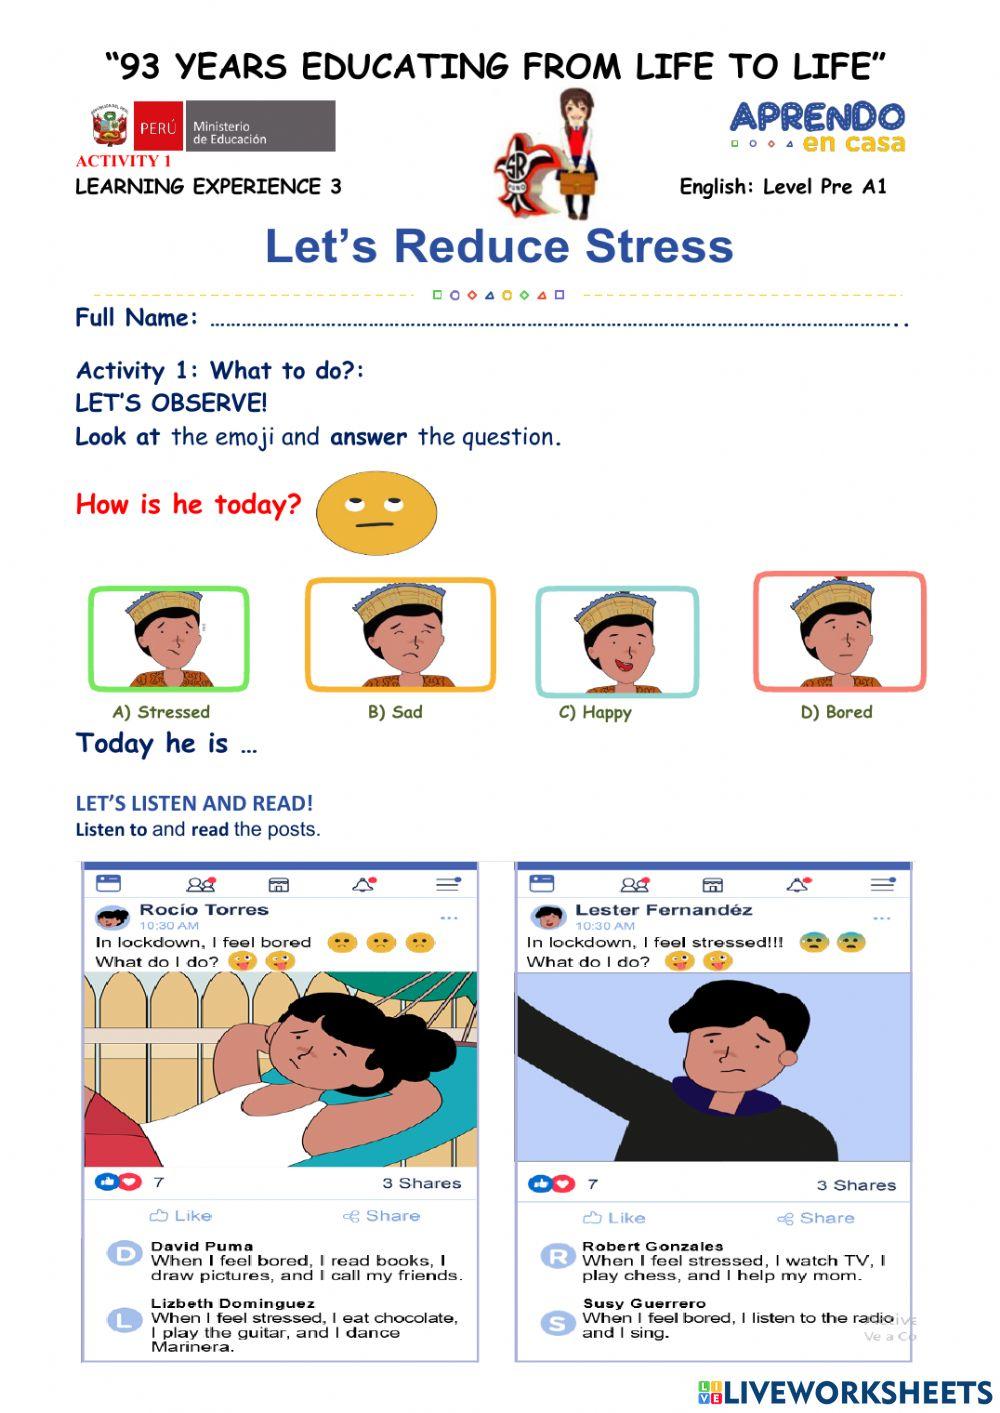 Let's Reduce Stress